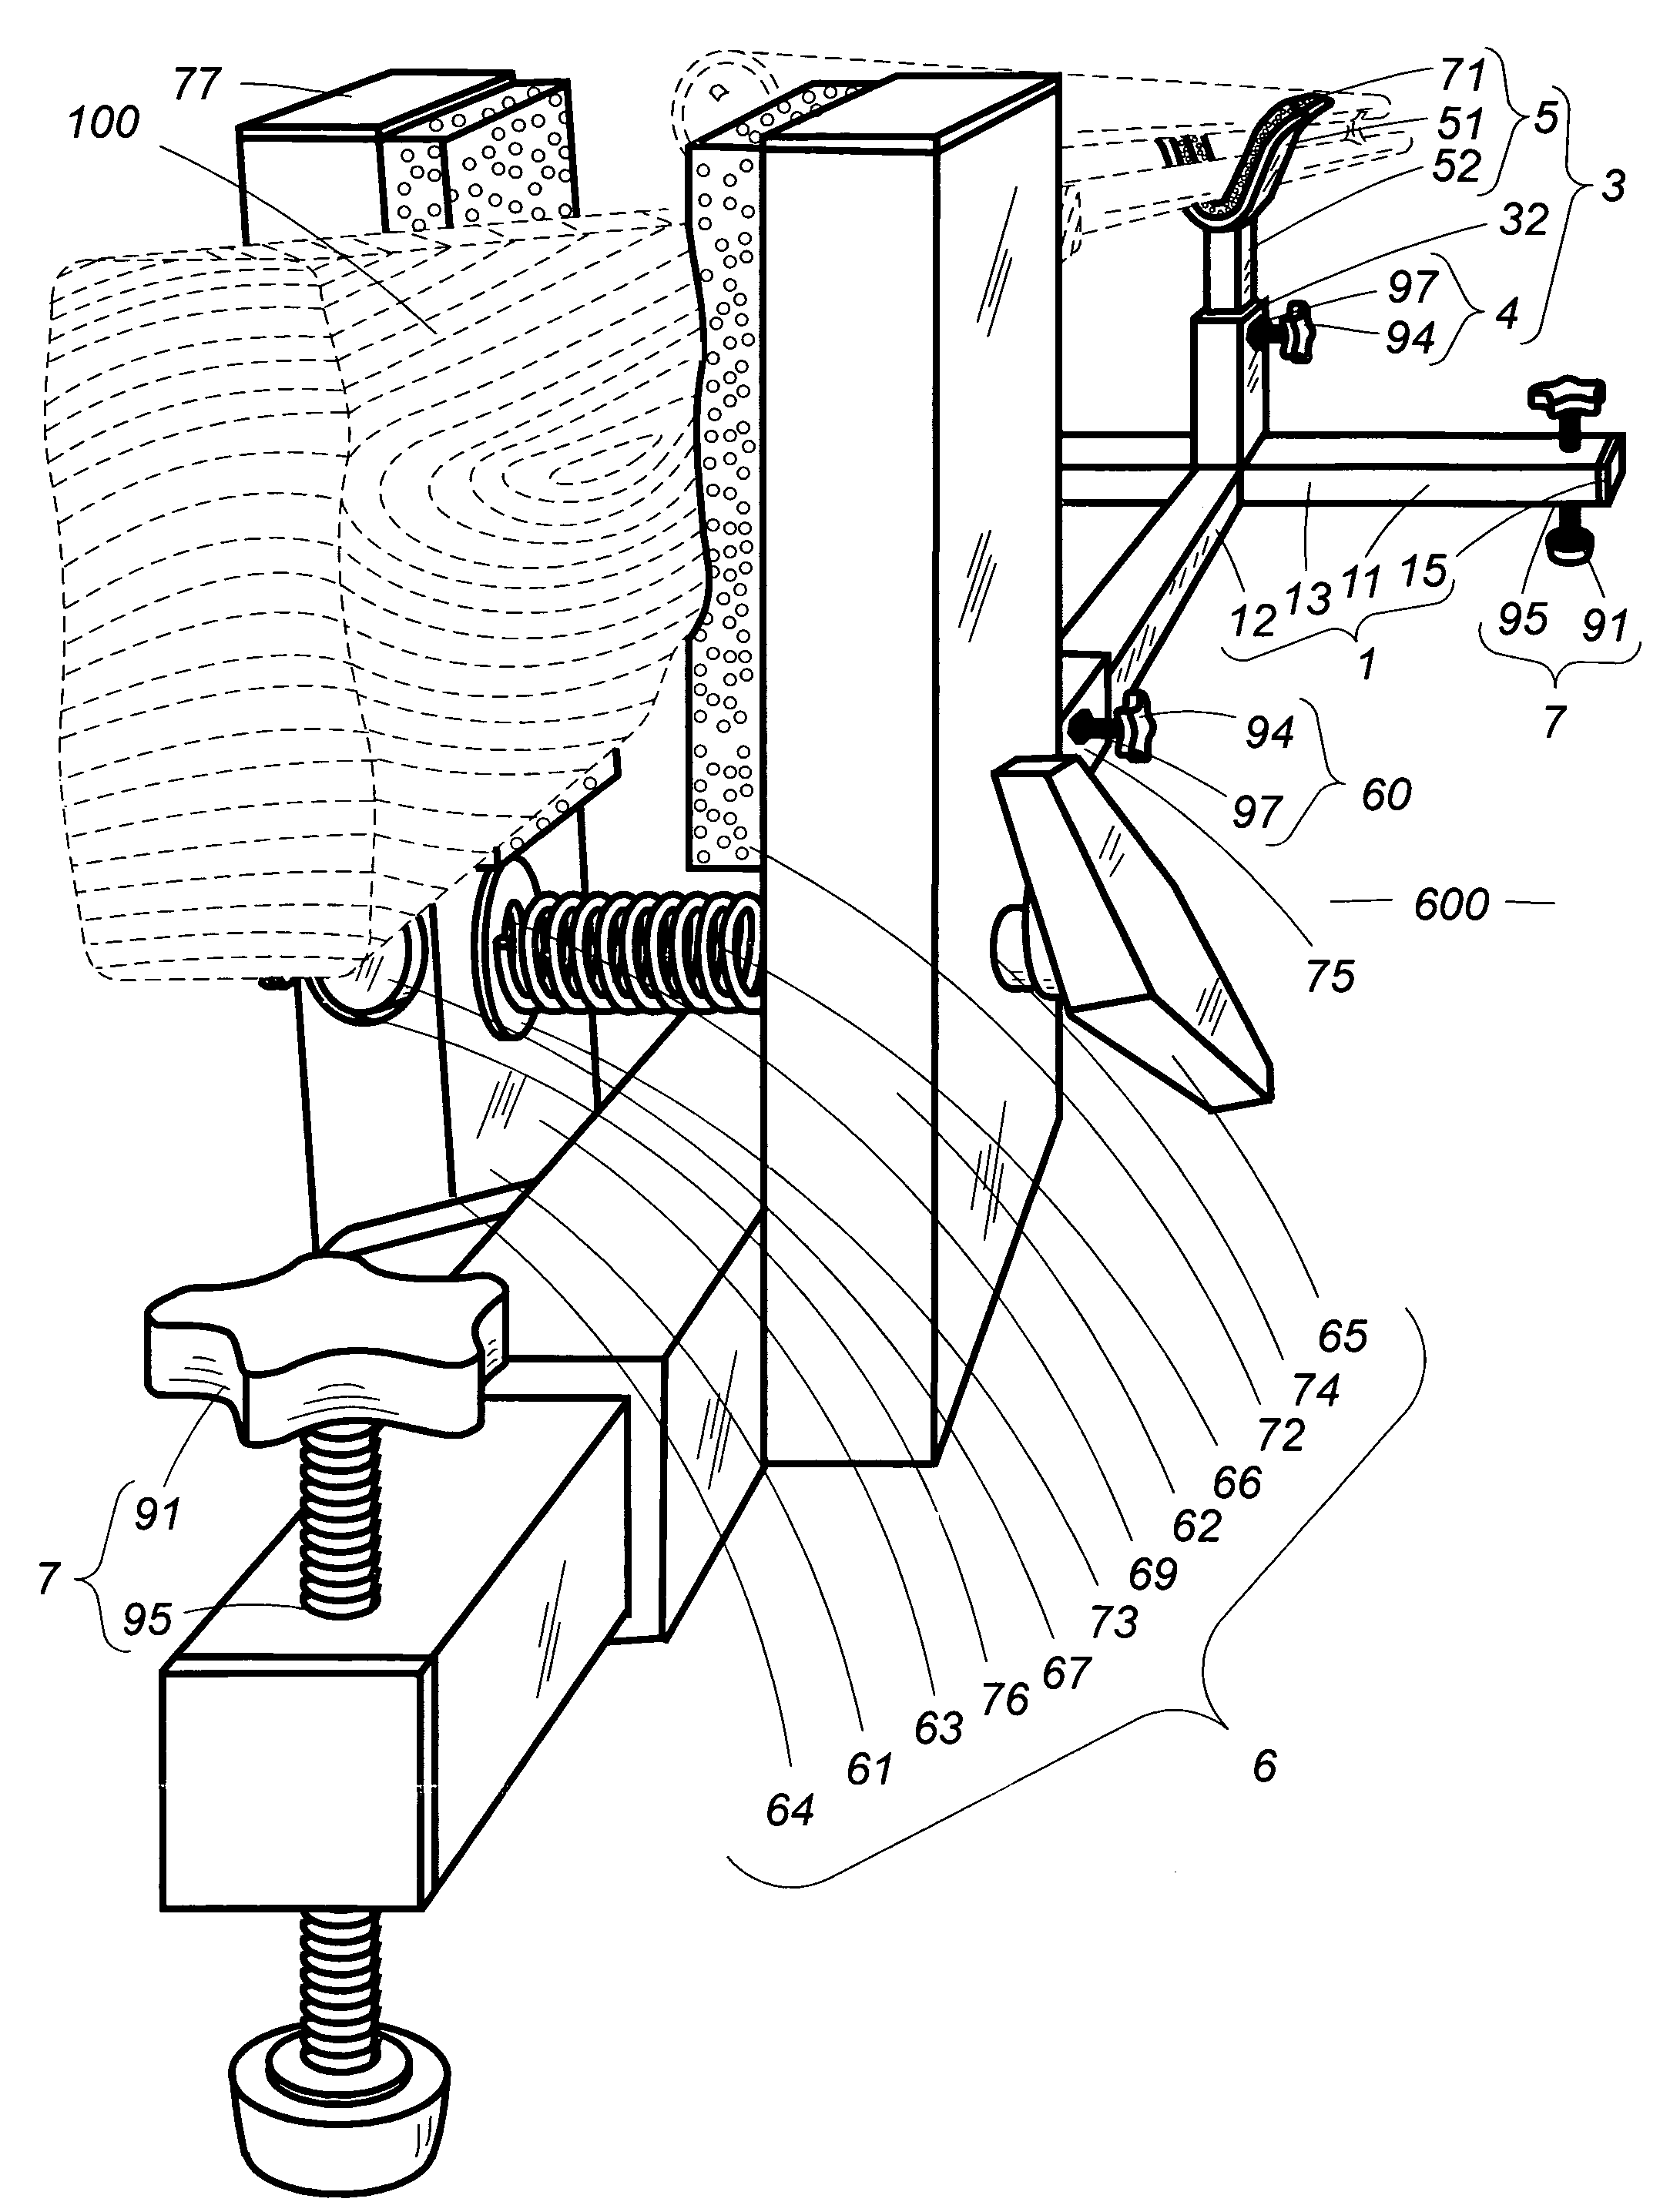 Firearm support assembly